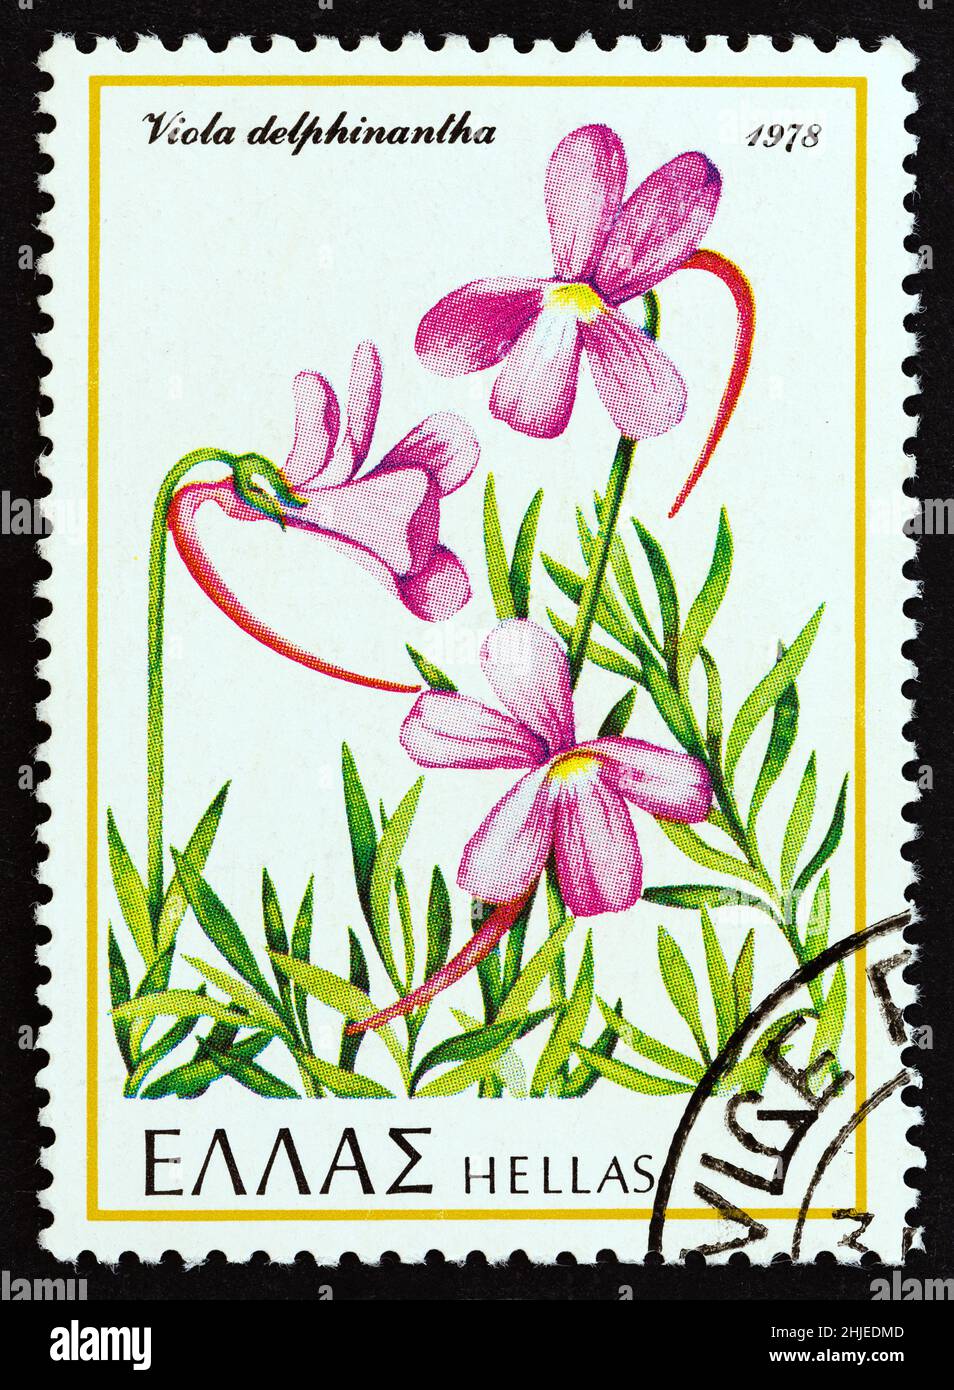 GREECE - CIRCA 1978: A stamp printed in Greece from the 'Greek flora' issue shows a Viola delphinantha flower, circa 1978. Stock Photo